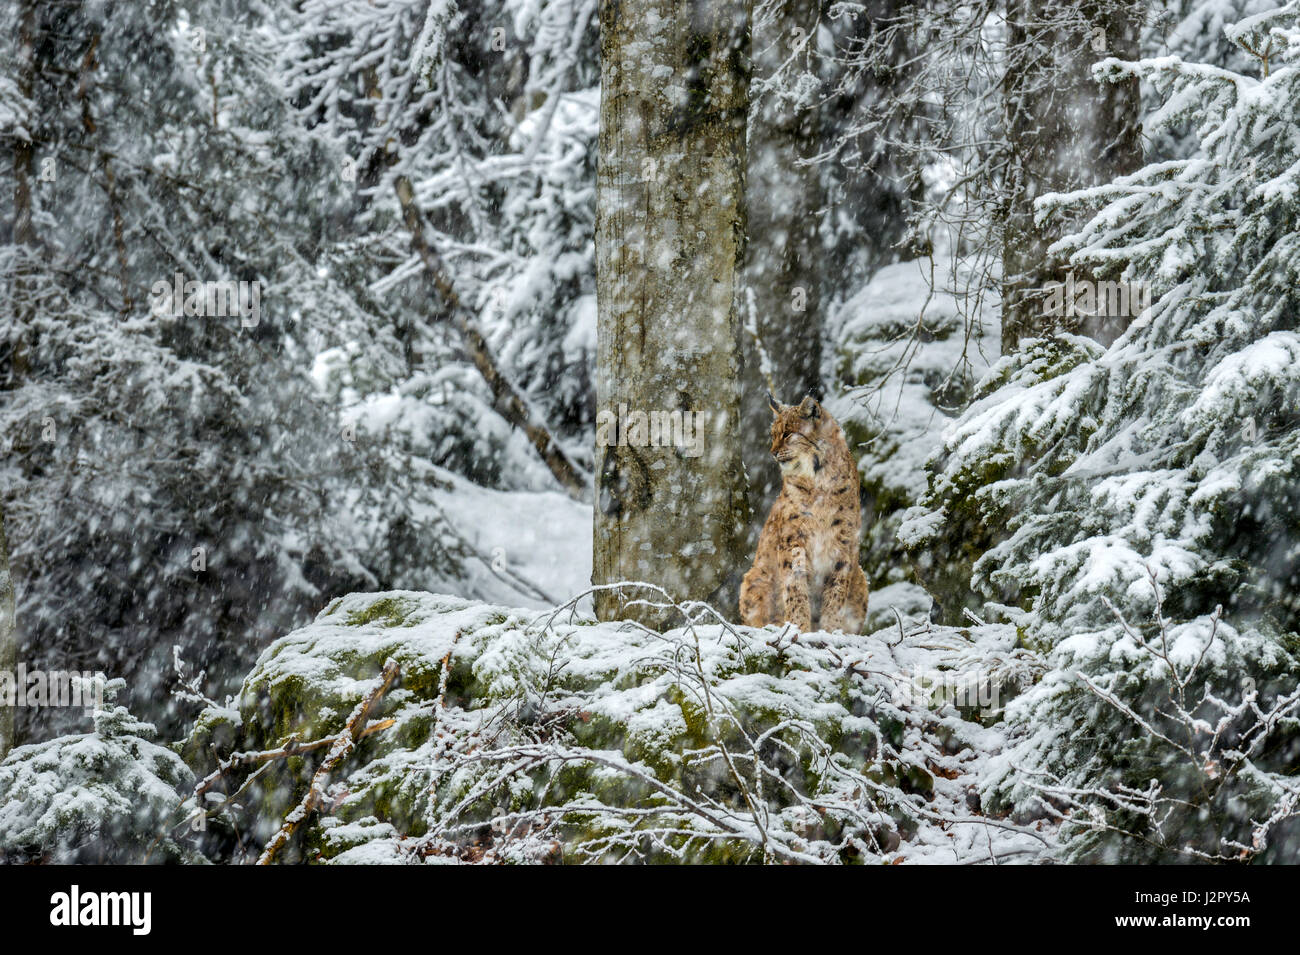 Beautiful Eurasian Lynx (Lynx lynx) depicted seated on a rocky outcrop, surveying its snow covered surroundings in a remote woodland winter setting. Stock Photo